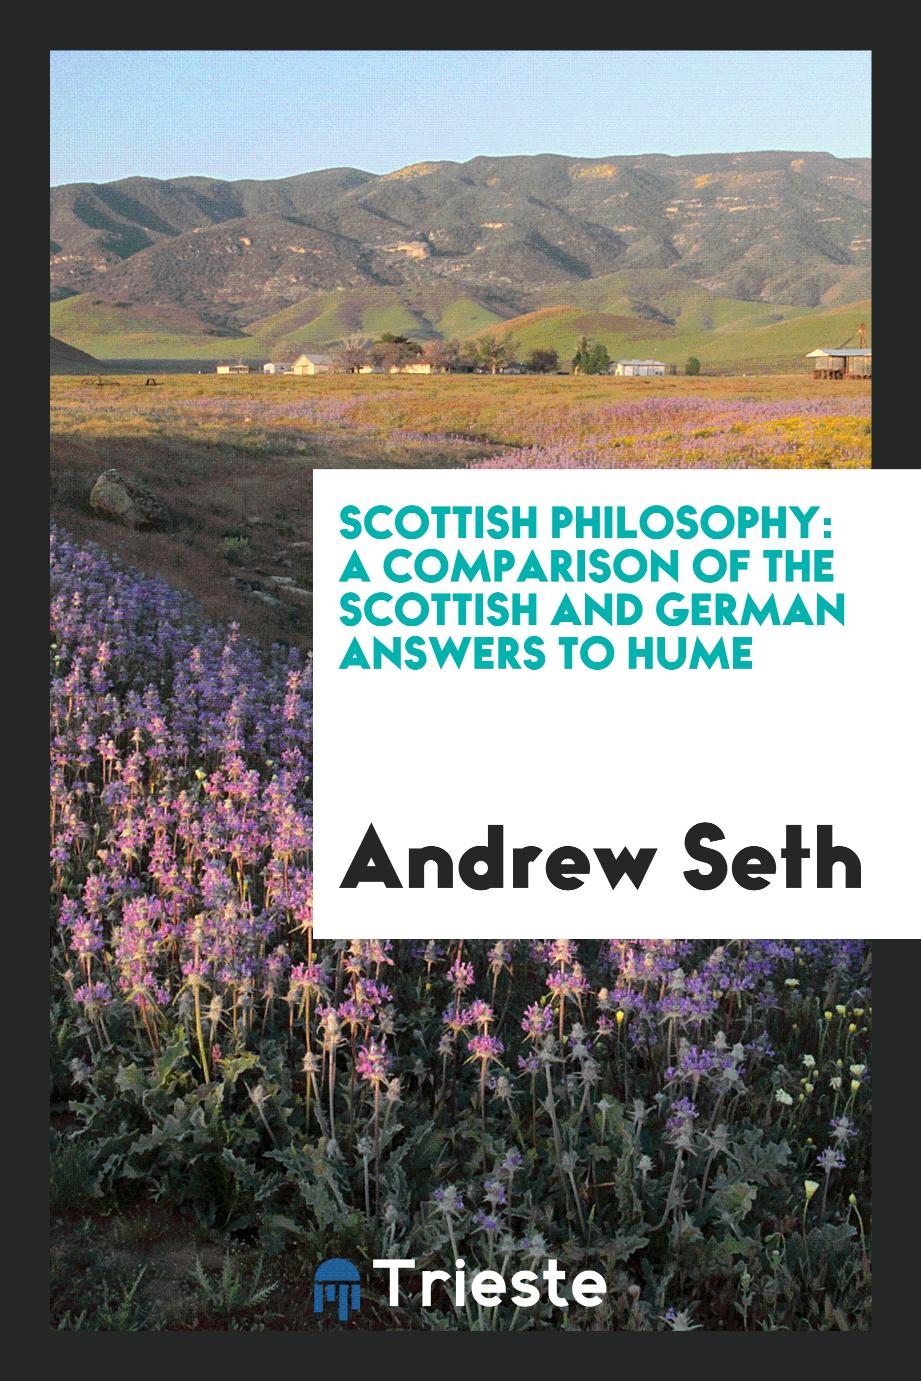 Scottish philosophy: a comparison of the Scottish and German answers to Hume